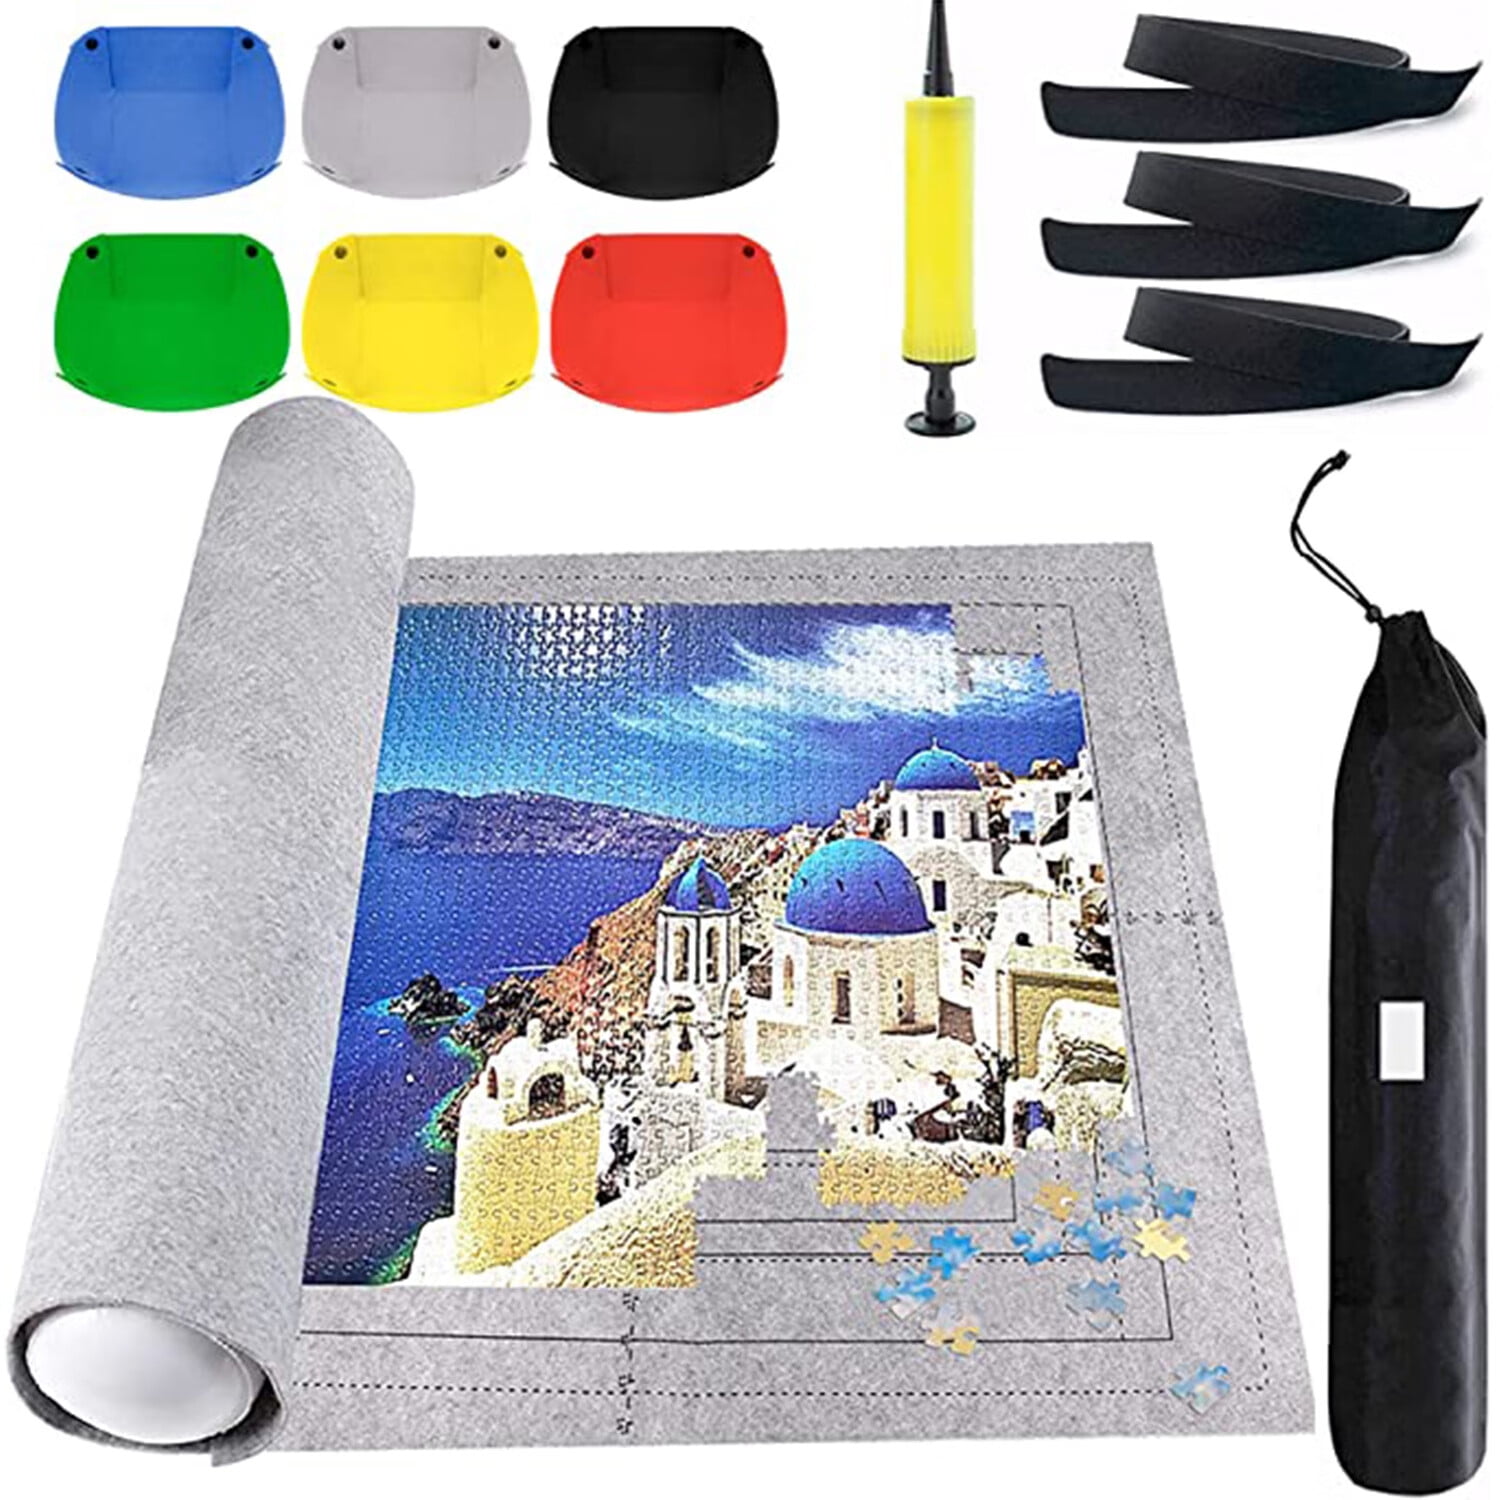 MasterPieces Accessories - Jigsaw Puzzle Roll-Up Mat & Stow Box - 36x30 